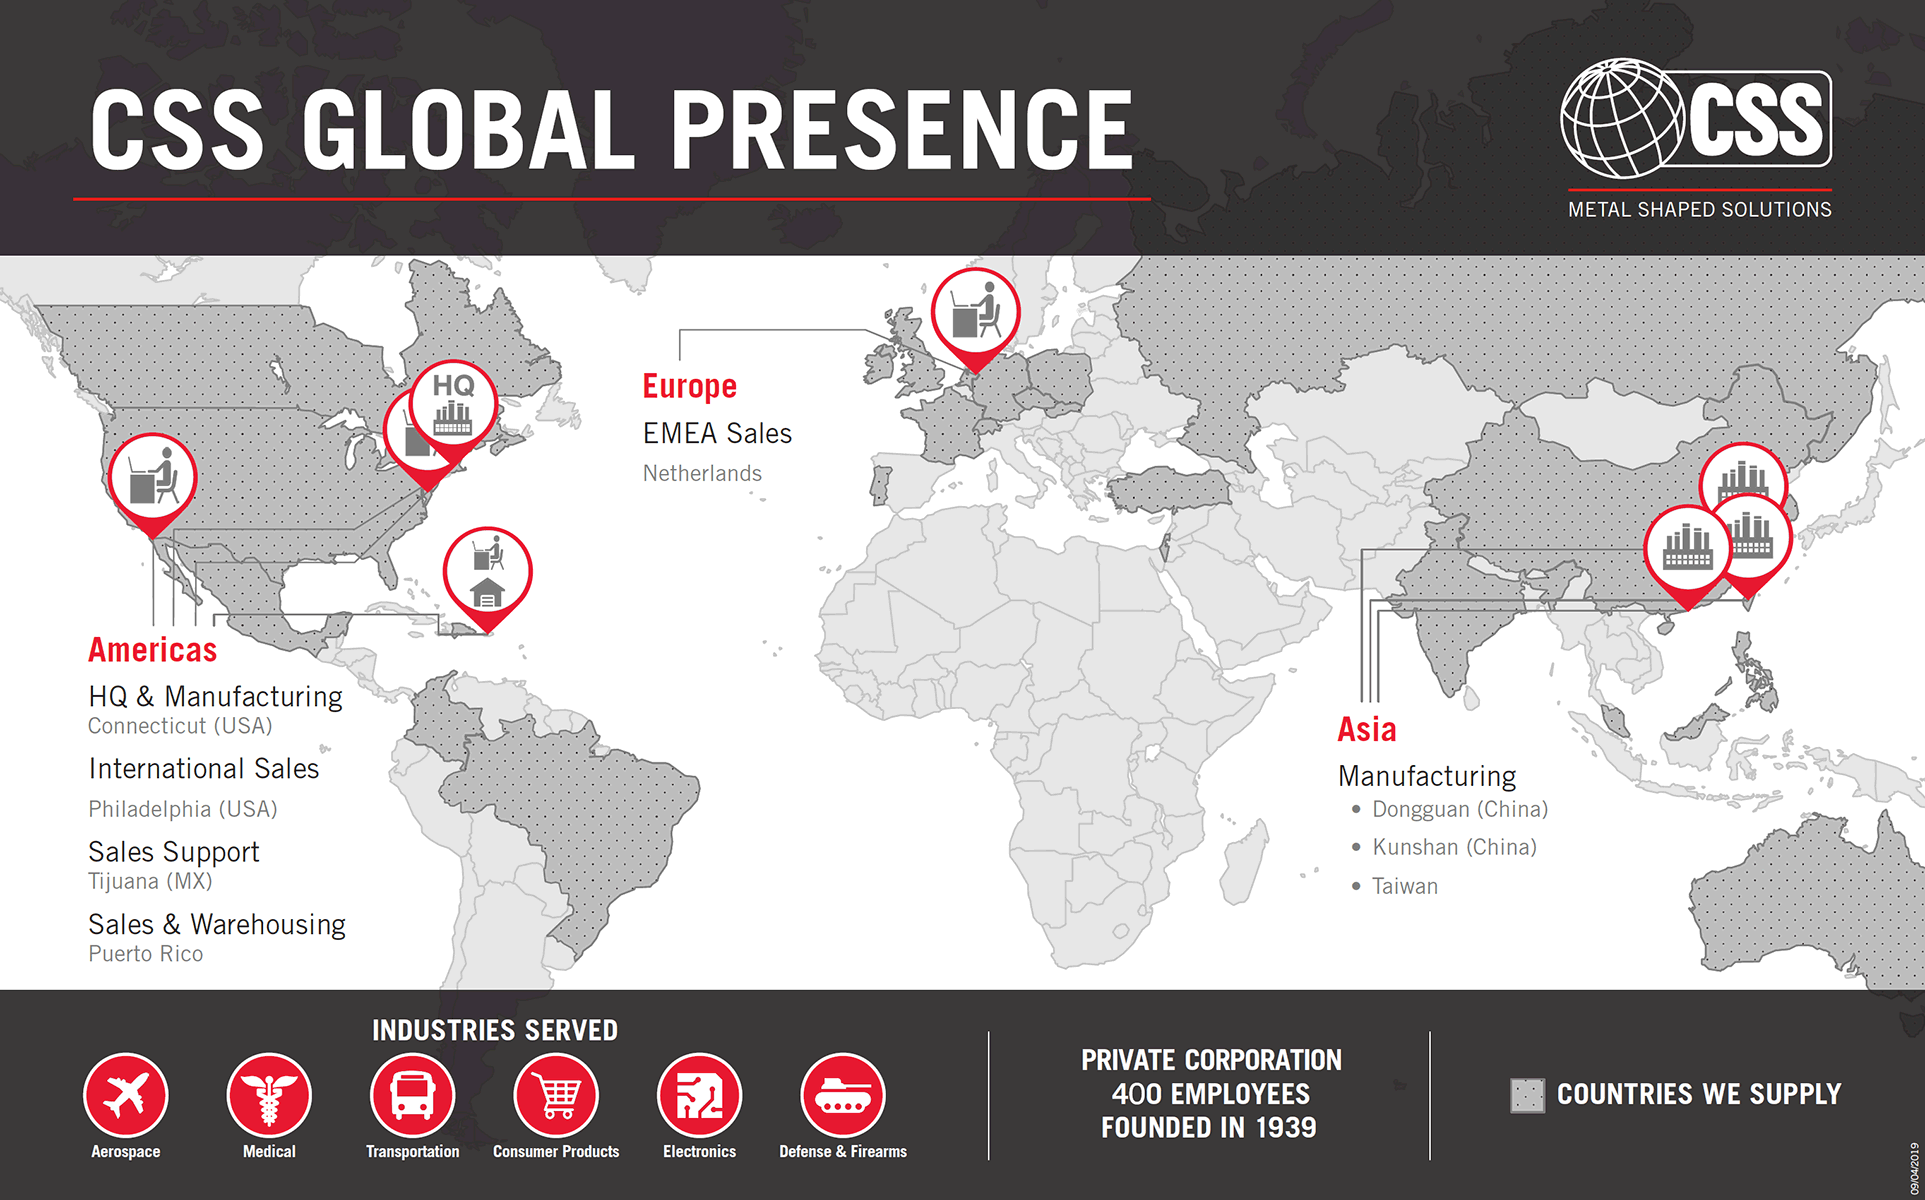 A map of the CSS Global Presence